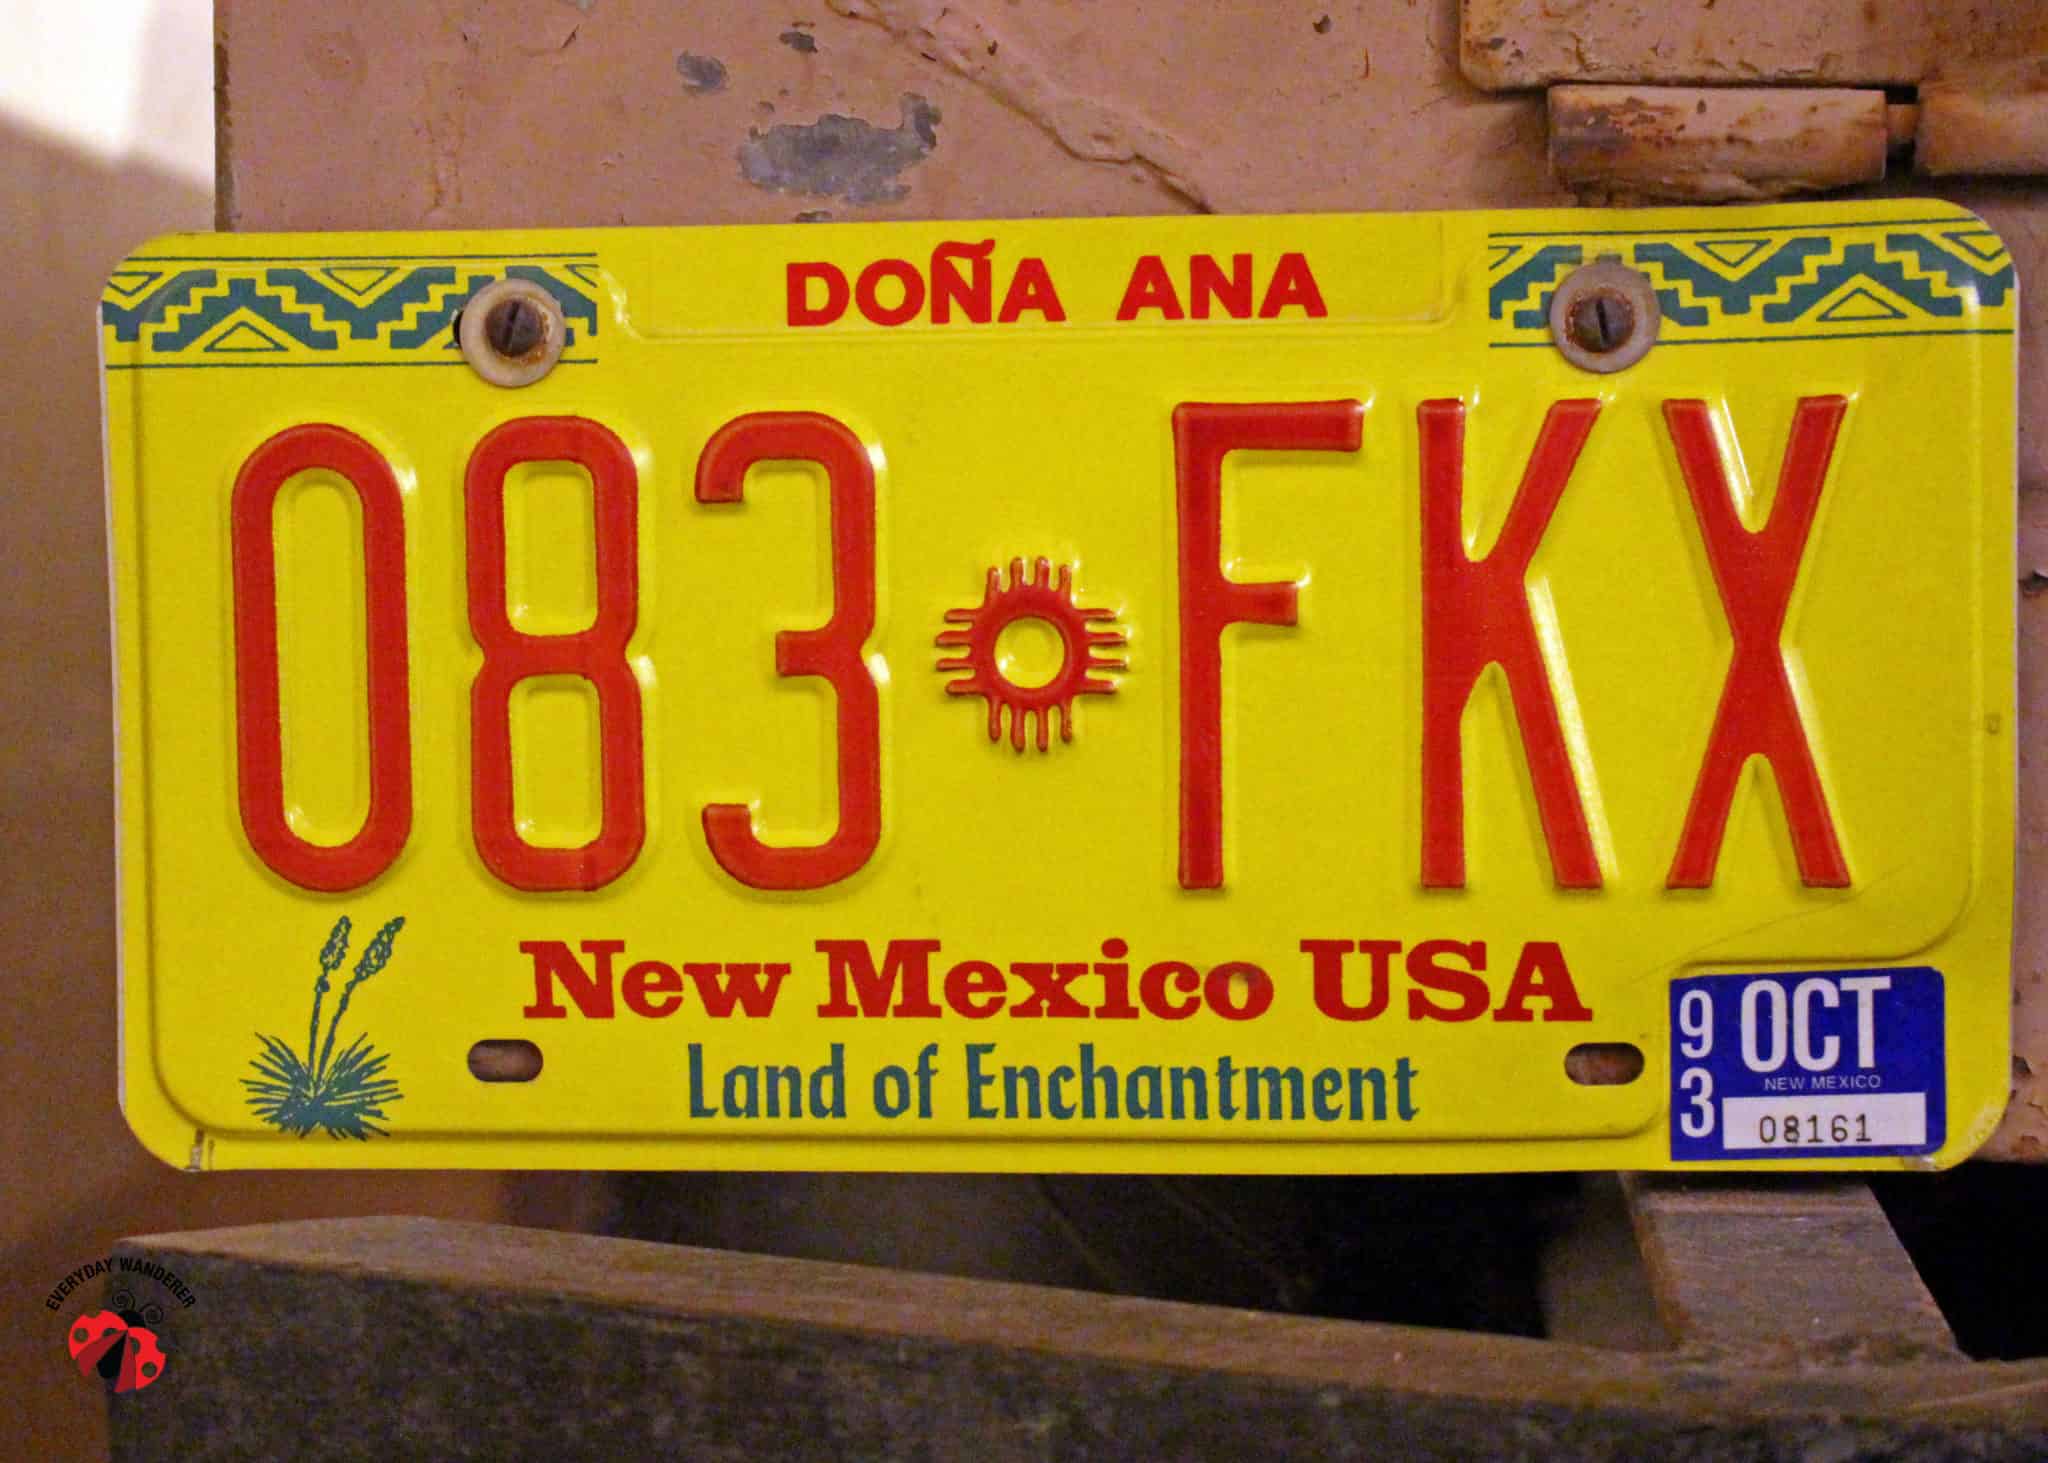 New Mexico's "Chile Capital of the World" License Plate